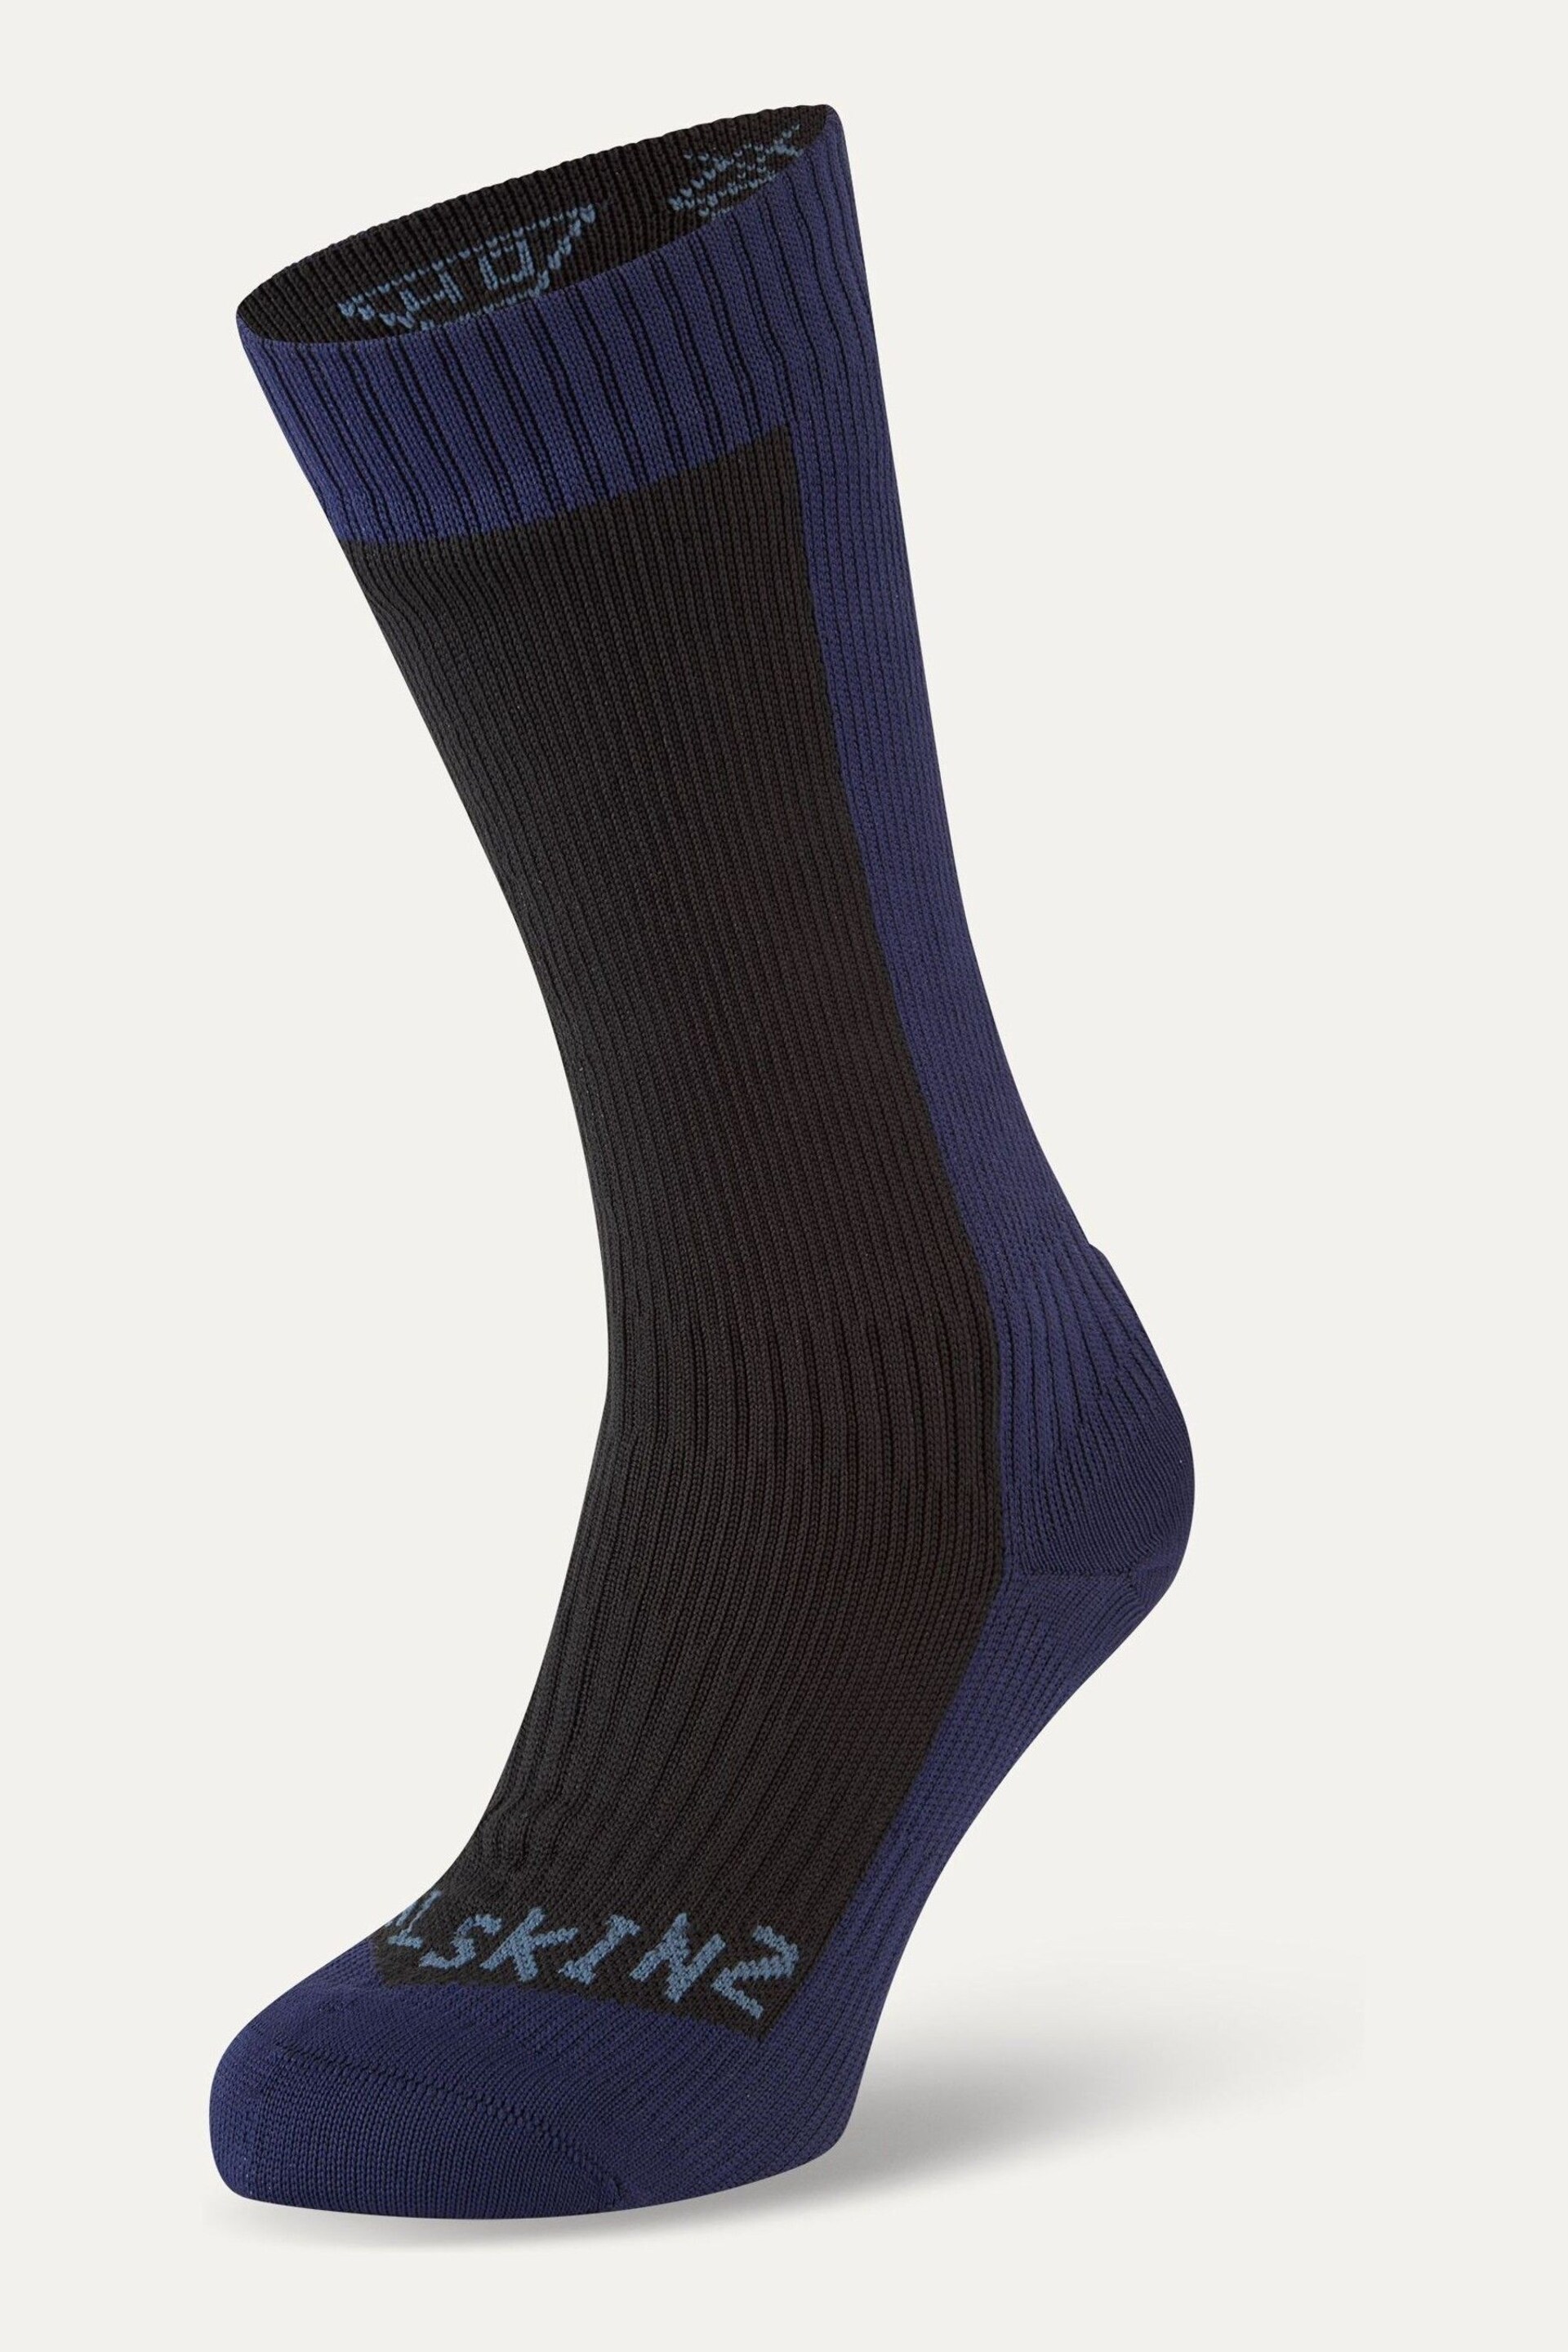 Sealskinz Blue Starston Waterproof Cold Weather Mid Length Socks - Image 1 of 2